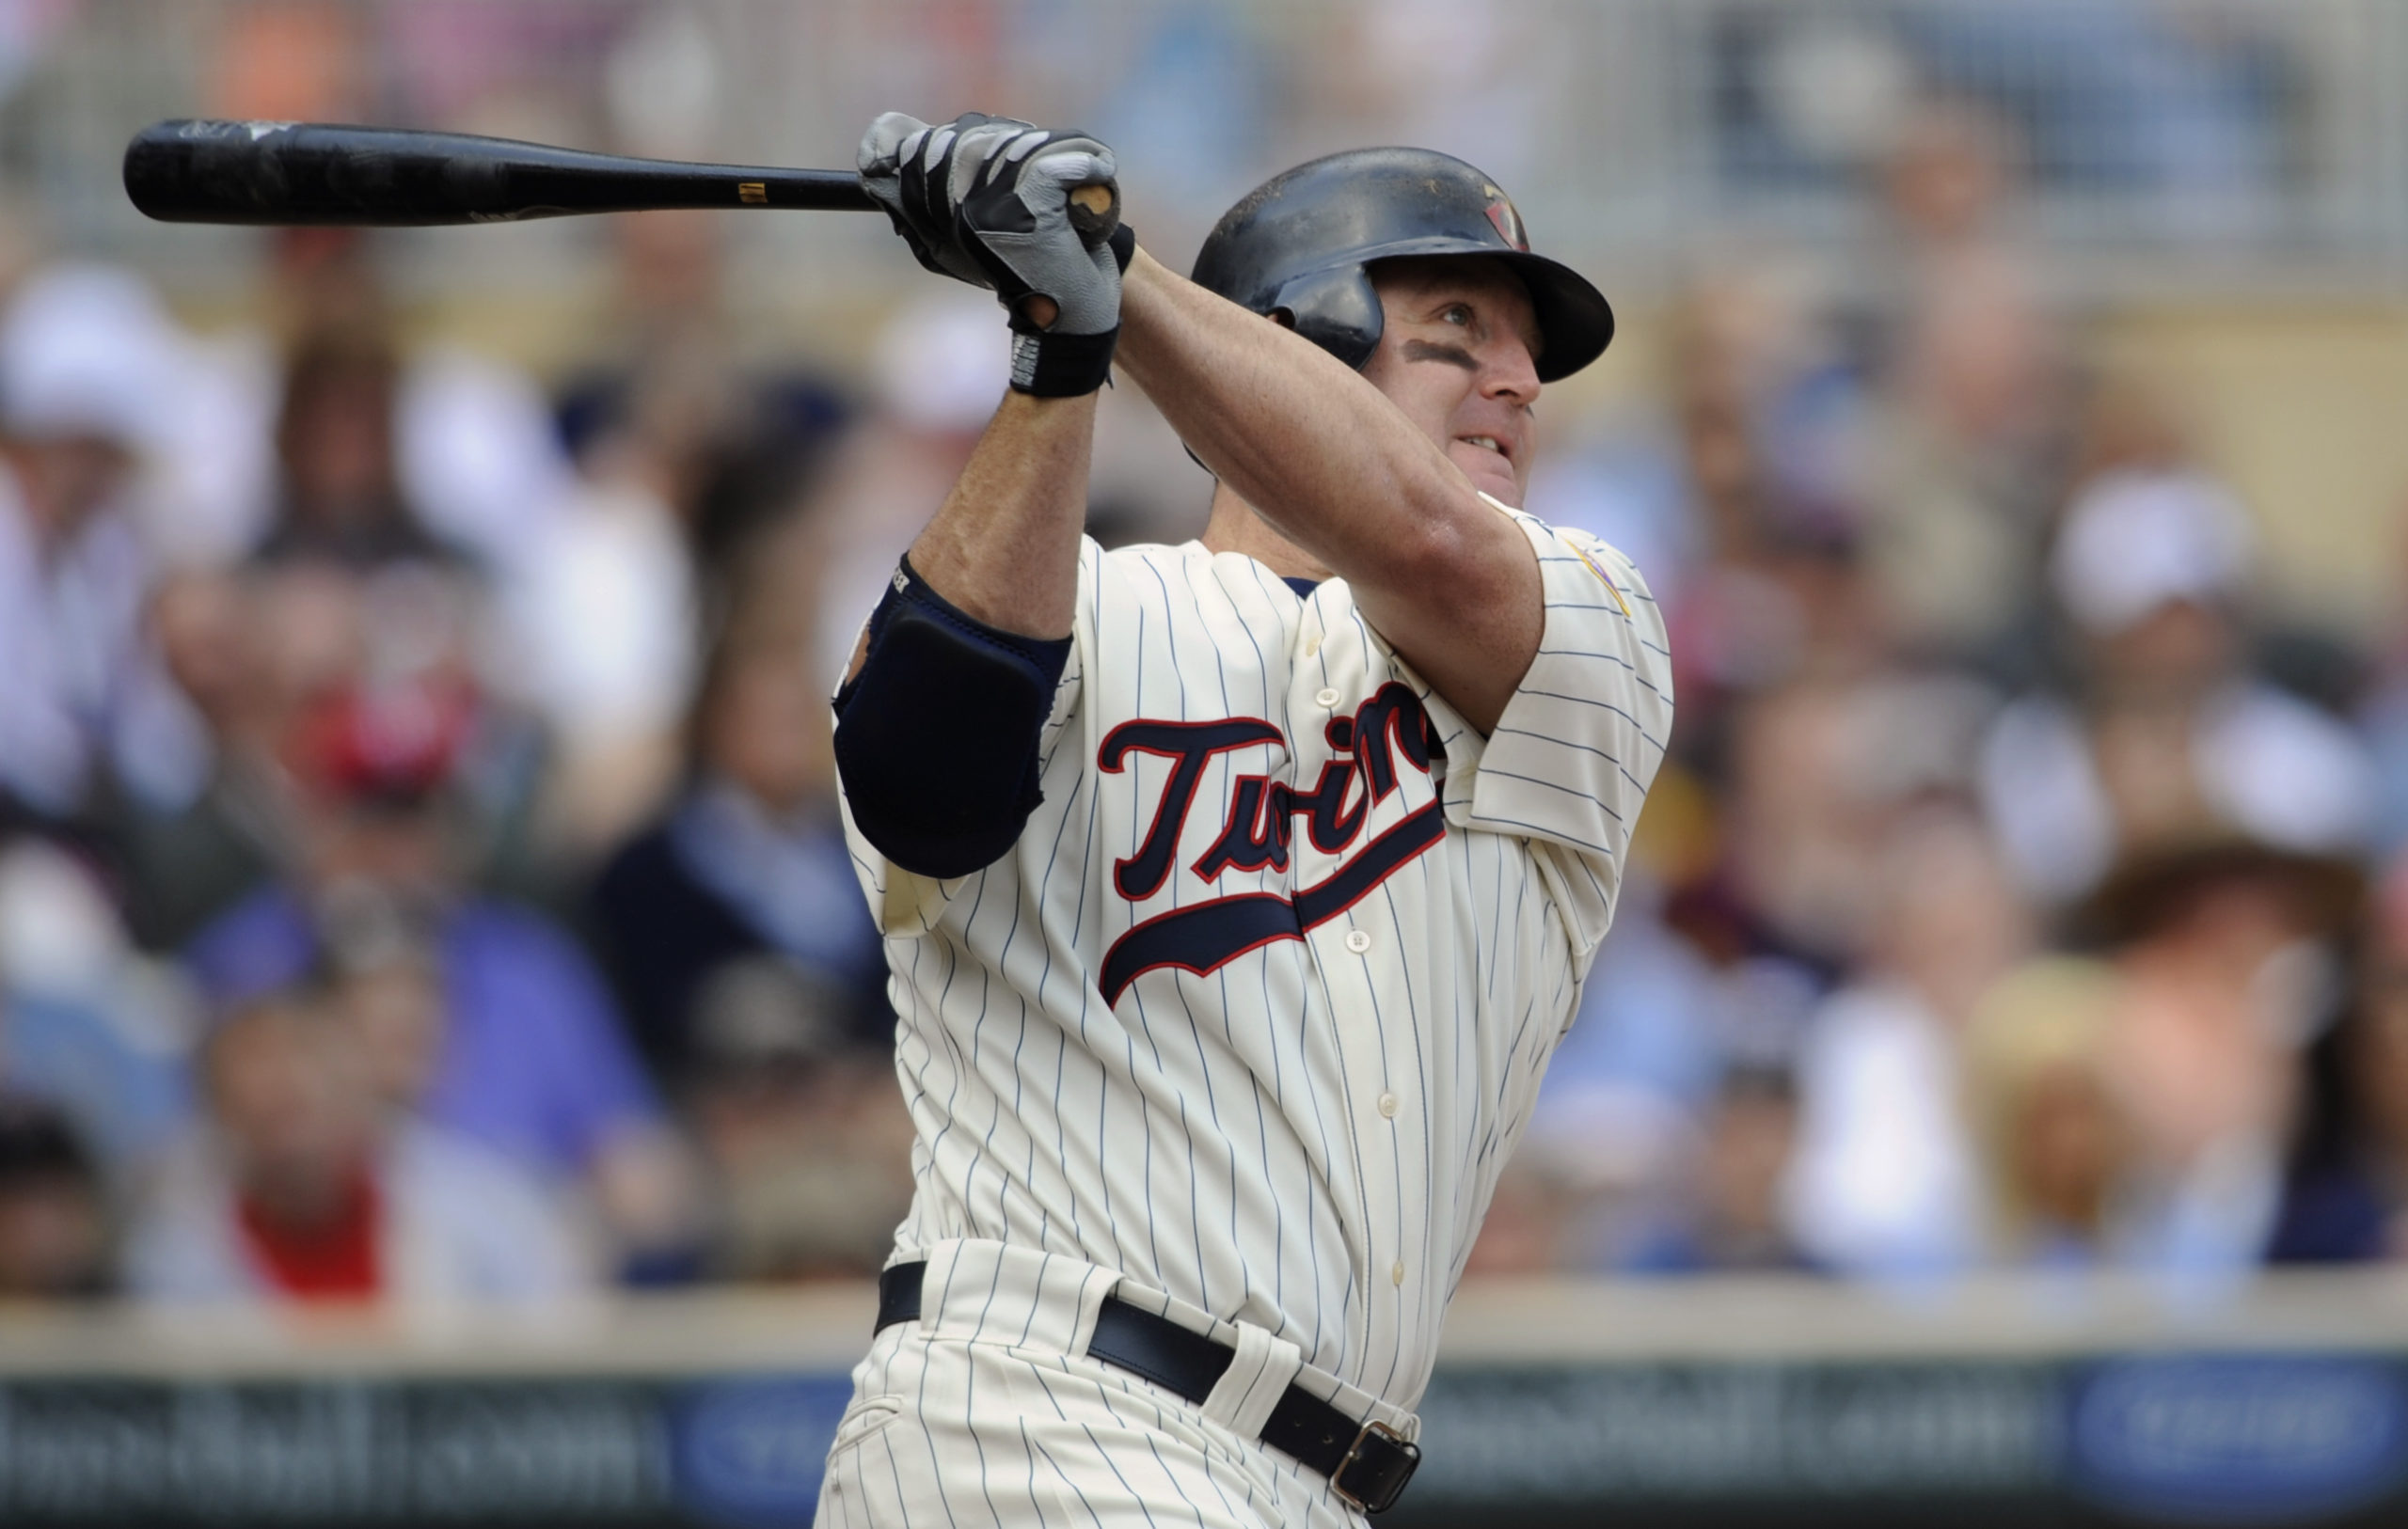 MINNEAPOLIS, MN - APRIL 24: Jim Thome #25 of the Minnesota Twins hits a double against the Cleveland Indians during the seventh inning of their game on April 24, 2011 at Target Field in Minneapolis, Minnesota. Twins defeated the Indians 4-3. Hannah Foslien/Getty Images